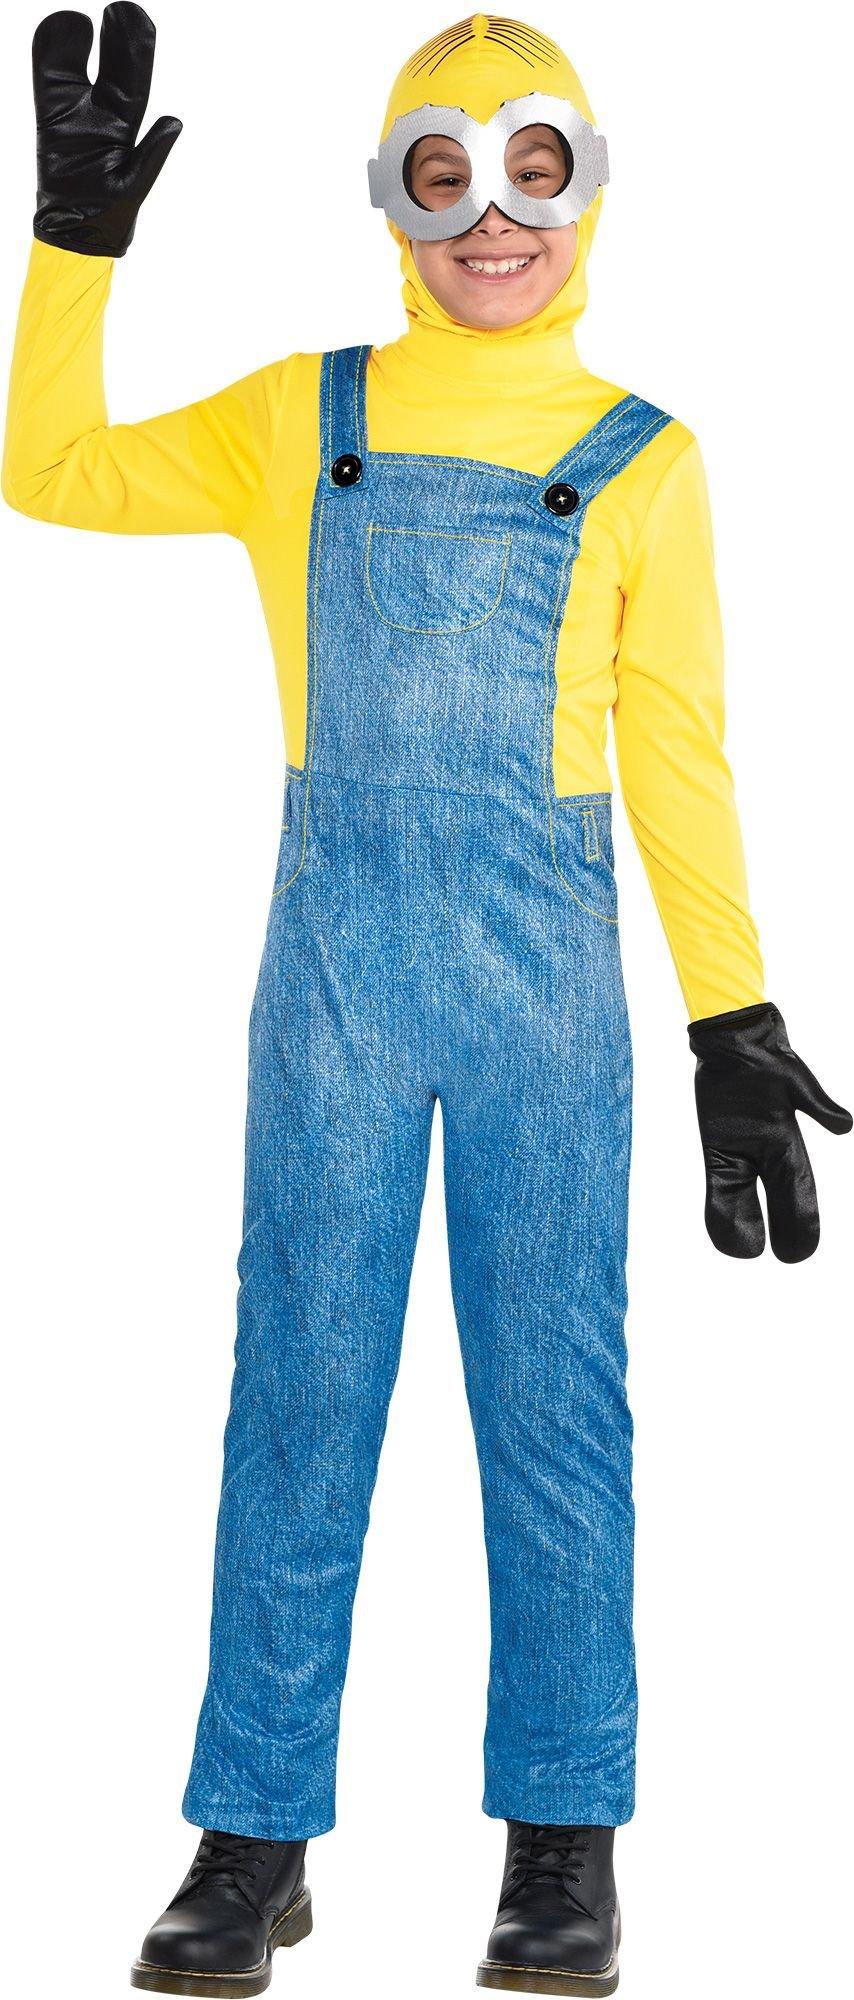 Despicable Me & Minion Costumes for Adults & Kids